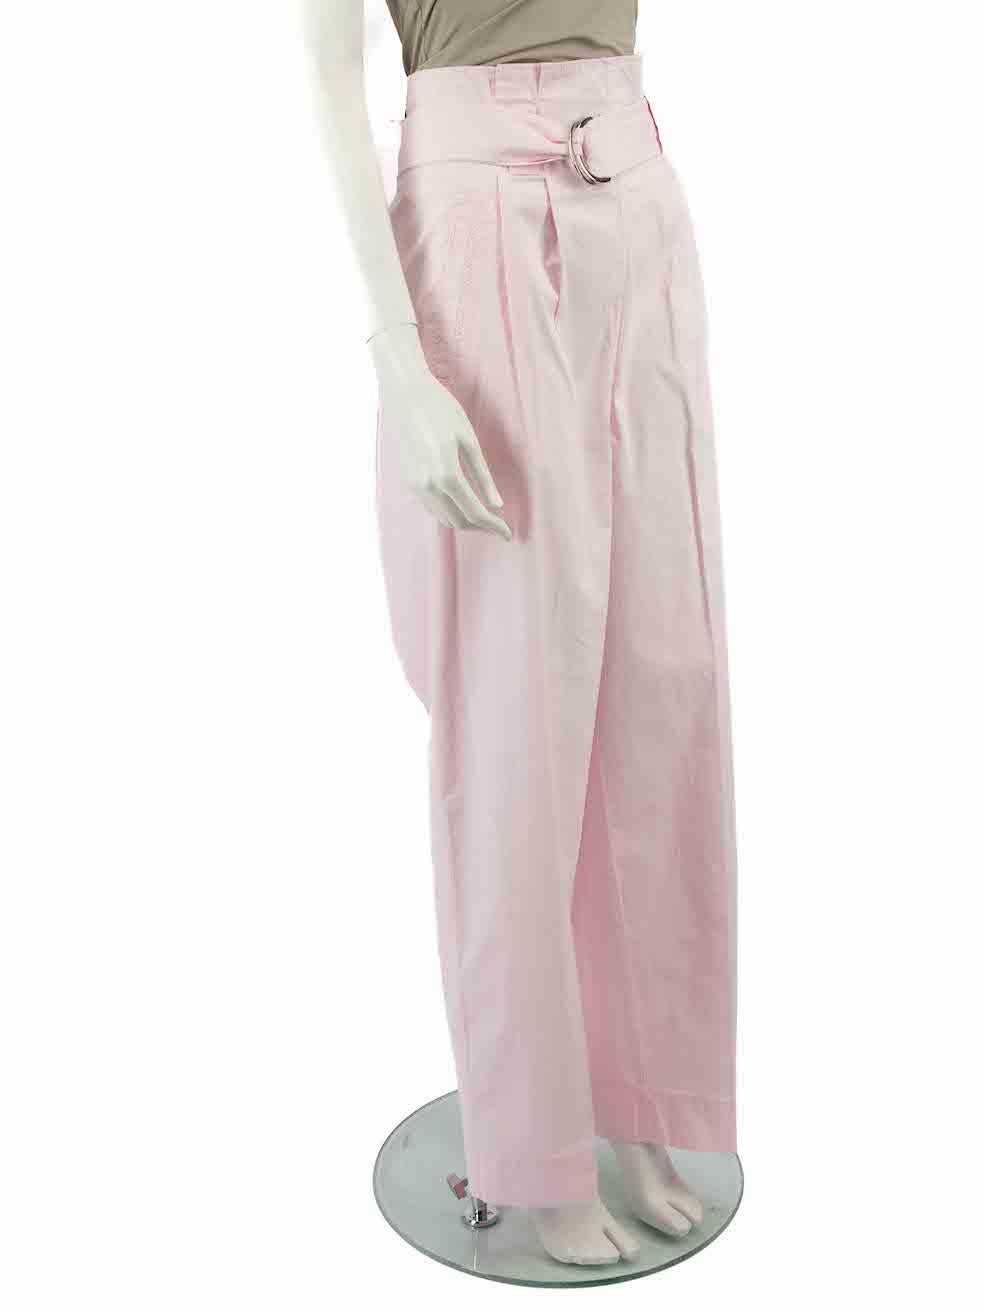 CONDITION is Very good. Minimal wear to trousers is evident. Minimal wear to the front and back with small marks on this used Ganni designer resale item.
 
 Details
 1975 model
 Pink
 Cotton
 Wide leg trousers
 High rise
 Gathered accent
 2x Front